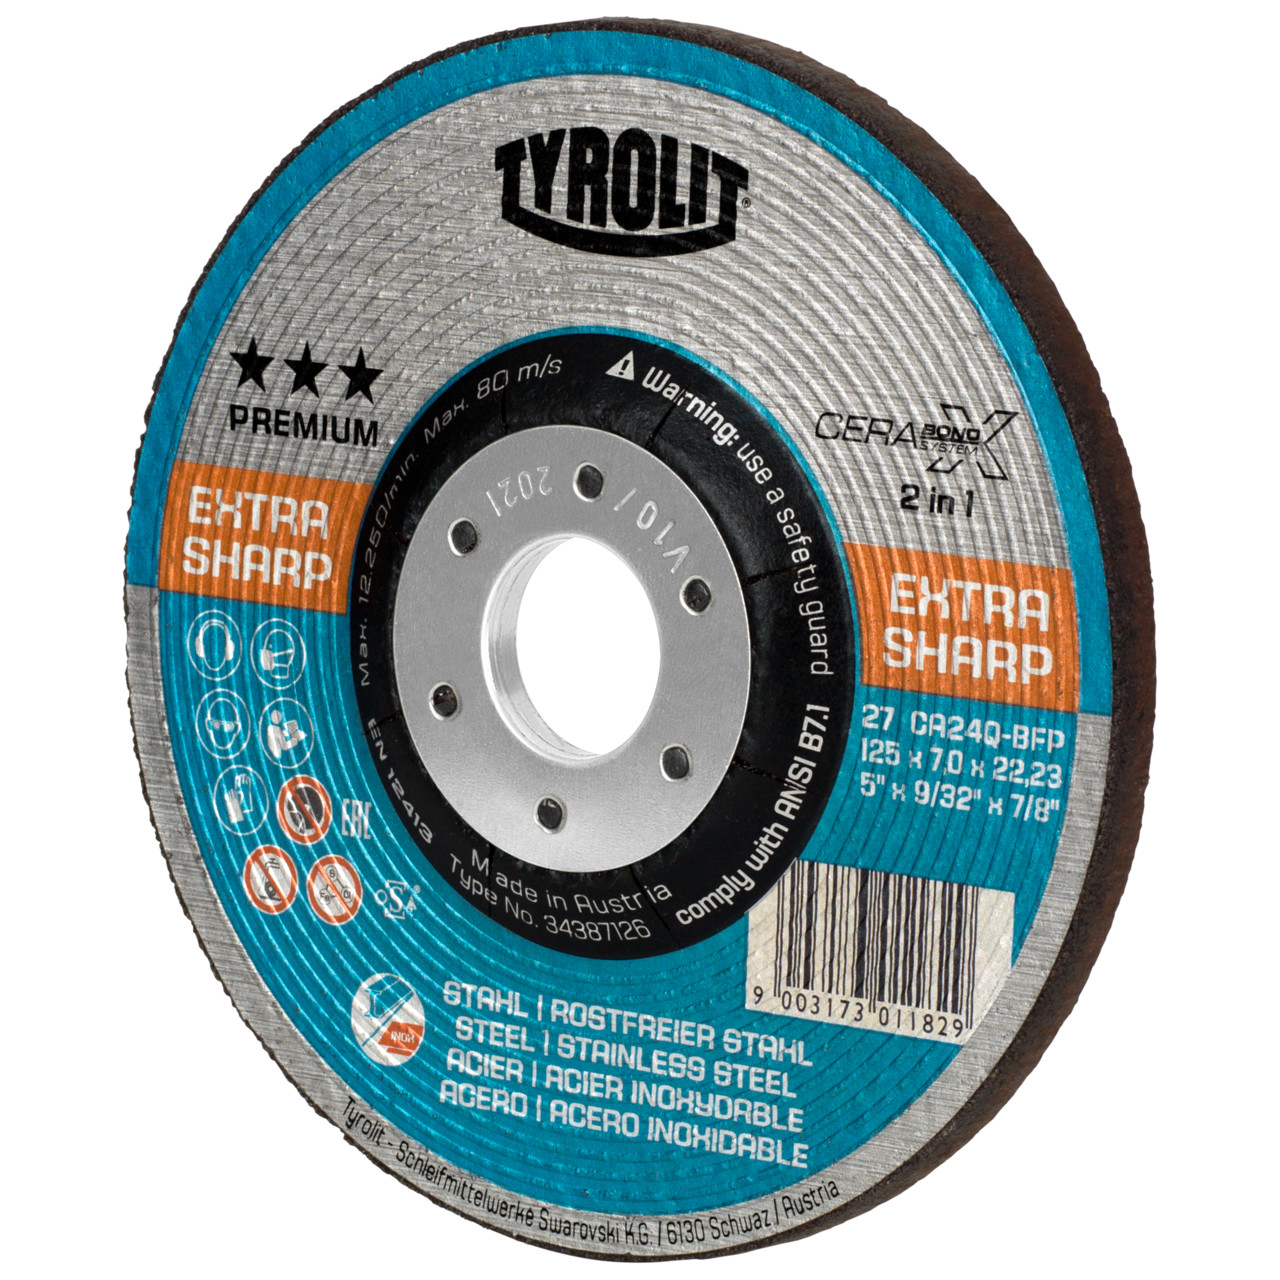 Tyrolit Roughing disc DxUxH 150x7x22.23 CERABOND X for steel and stainless steel